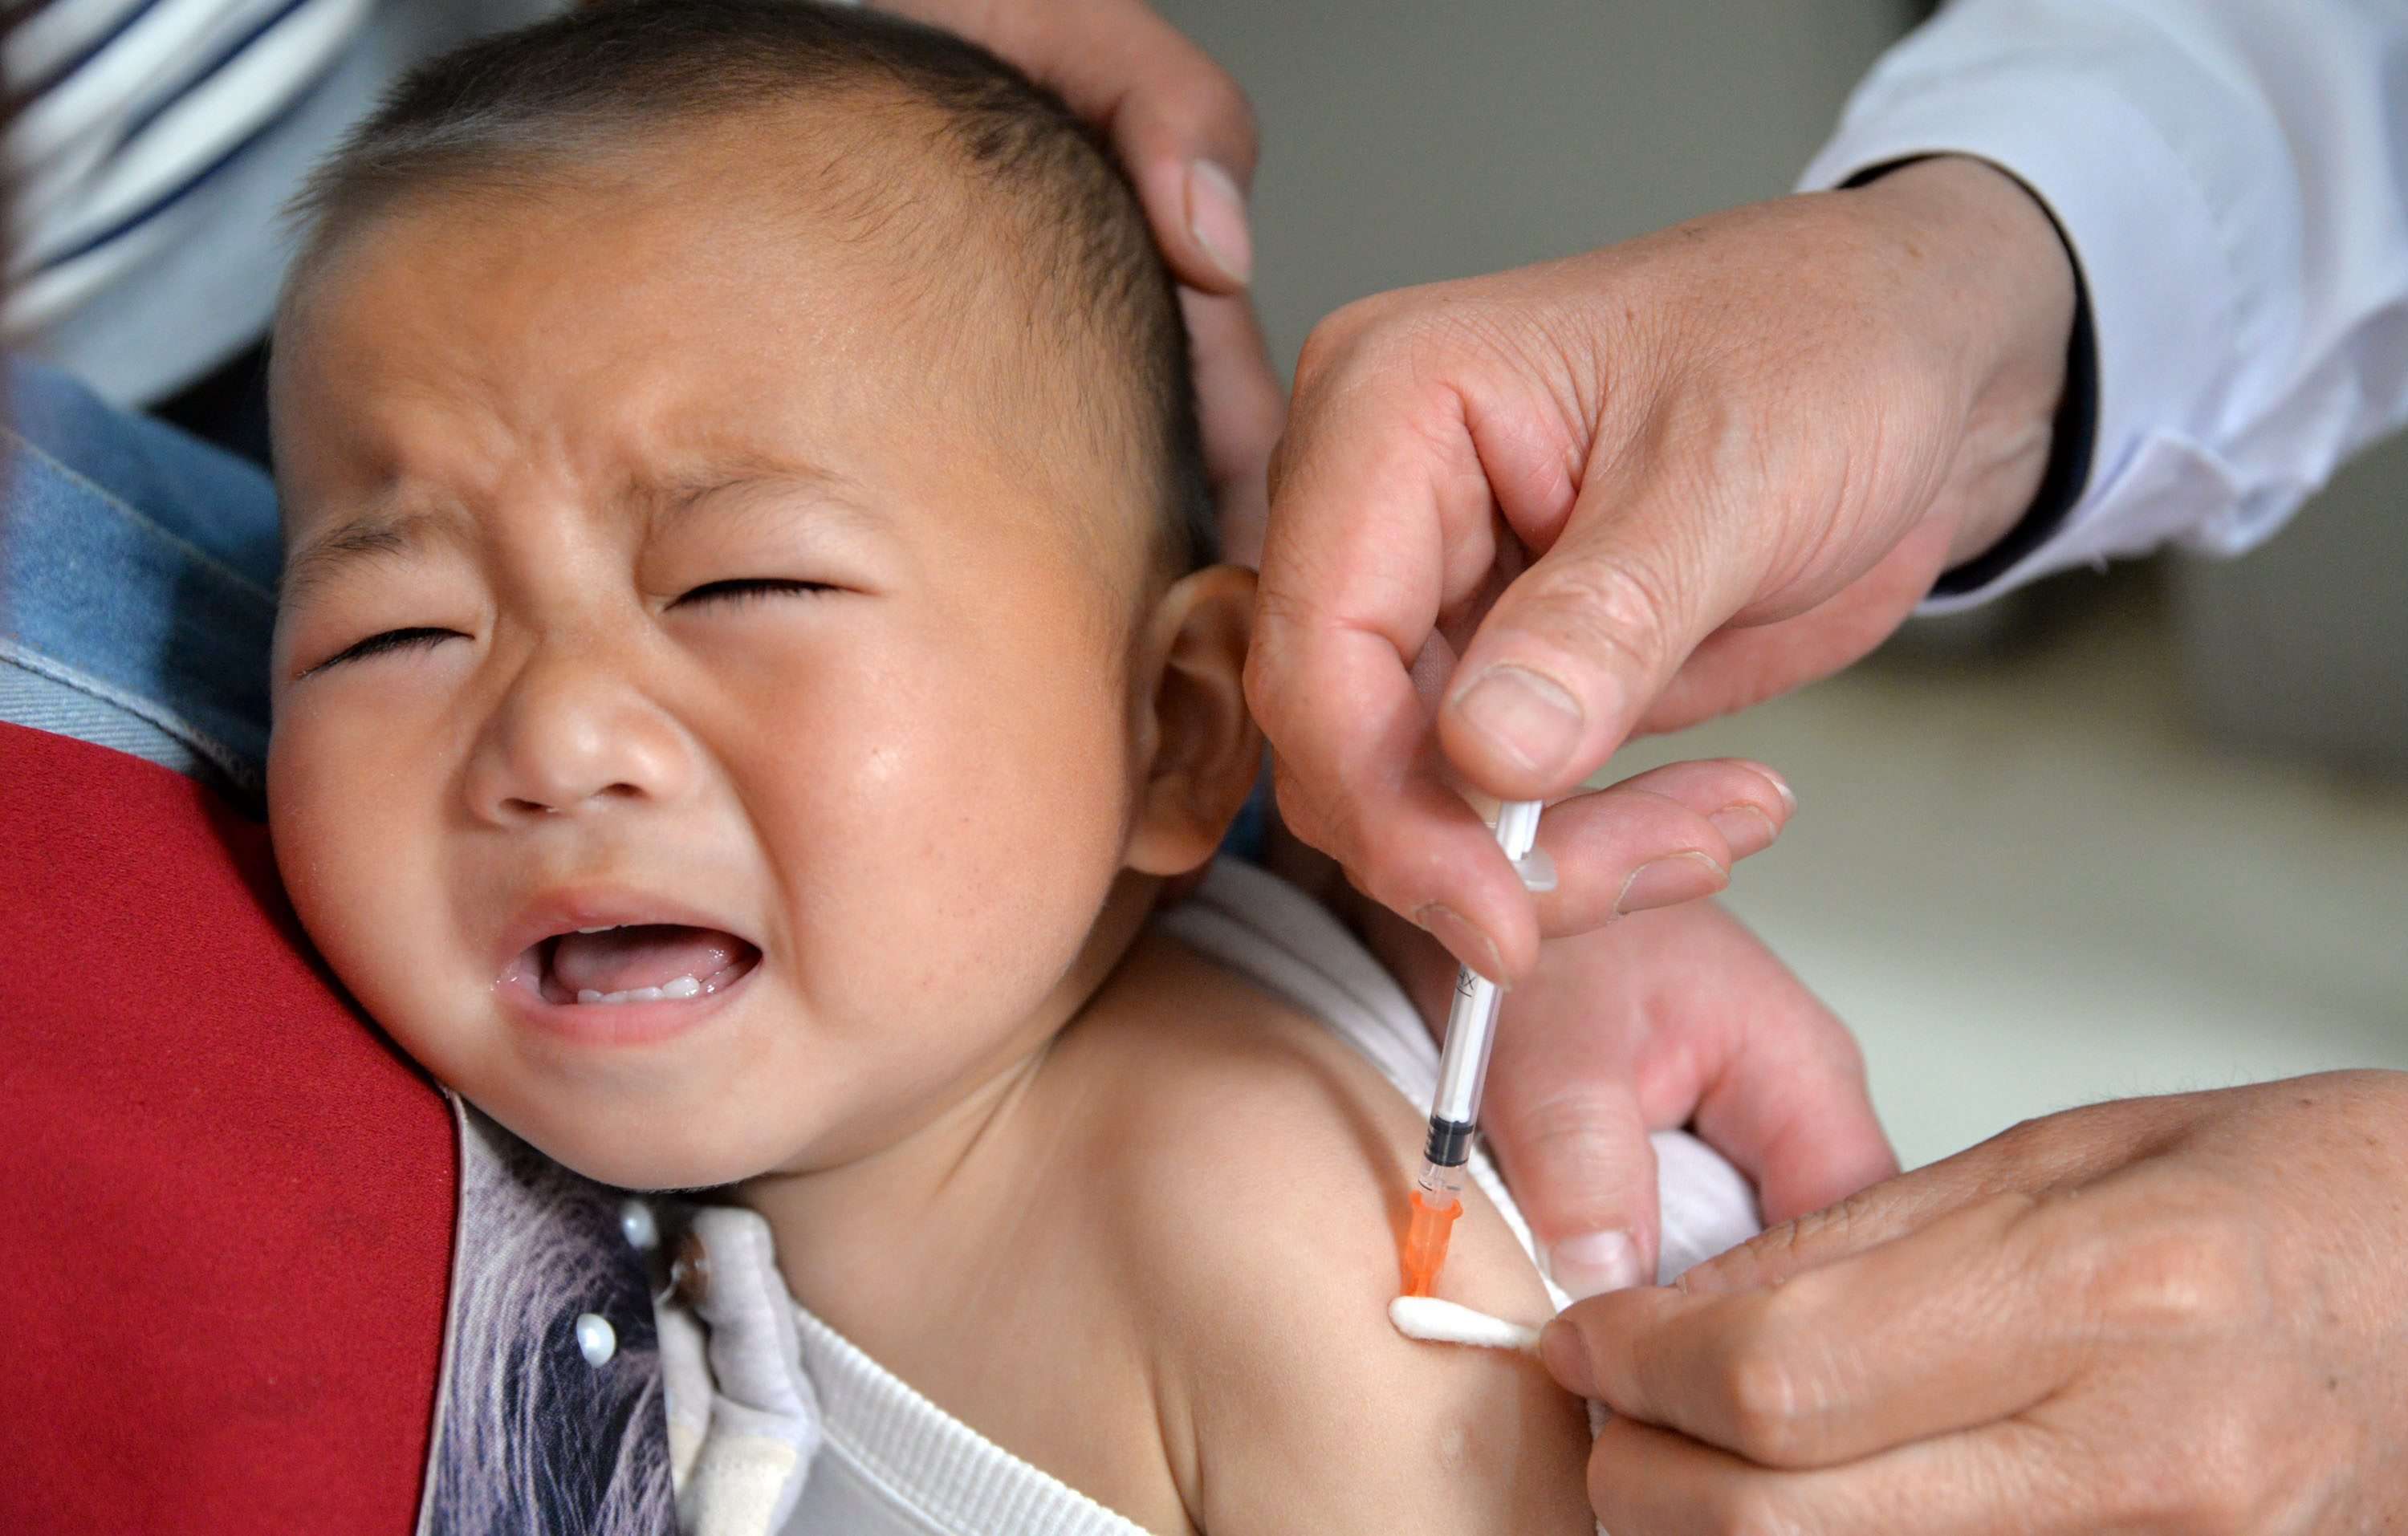 Chinese police have arrested a number of people in connection with the illegal sale and distribution of improperly stored vaccines worth 570 million yuan. Photo: EPA